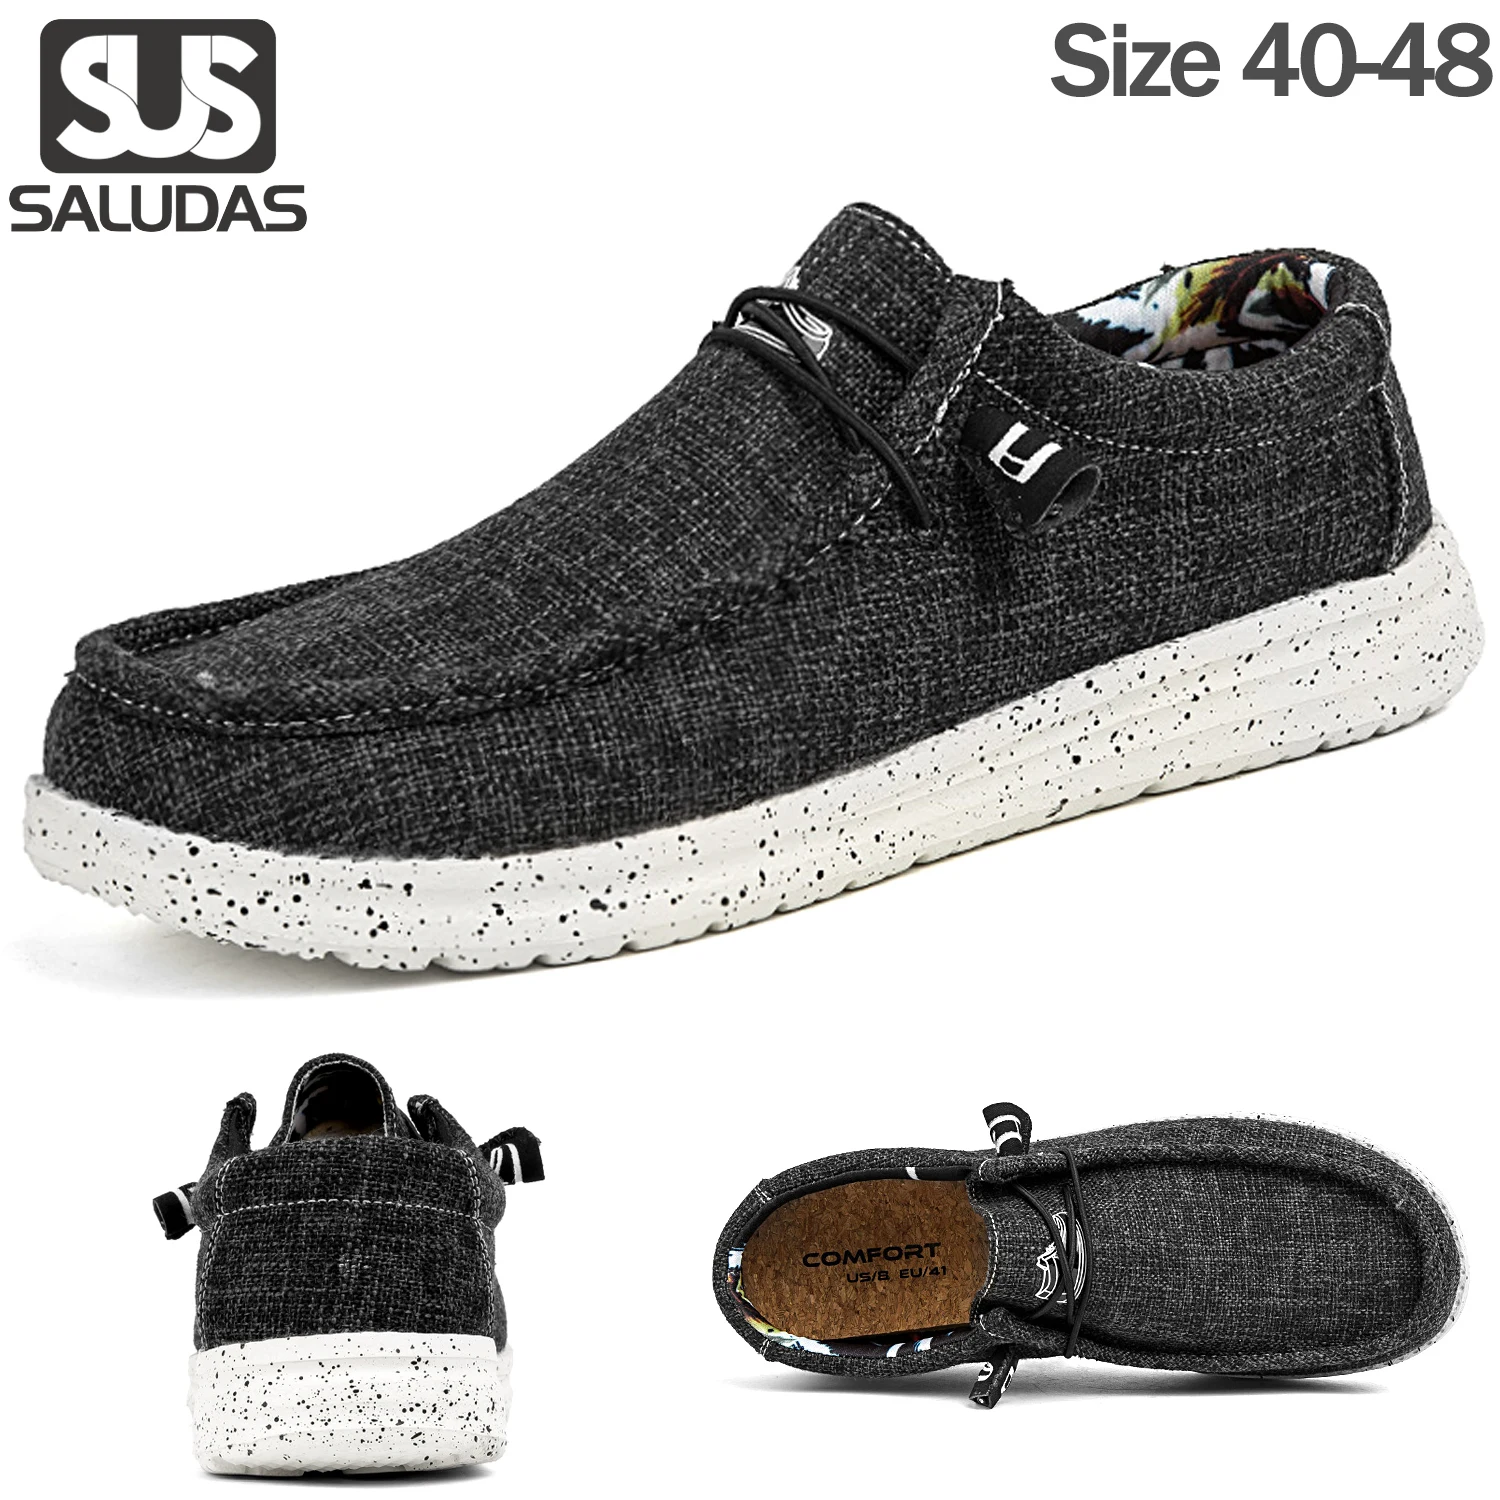 

SALUDAS Men Shoes Slip On Loafers Arch Support Boat Shoes for Extra Cushioning and Pain Relief Canvas Leisure Flat Walking Shoes